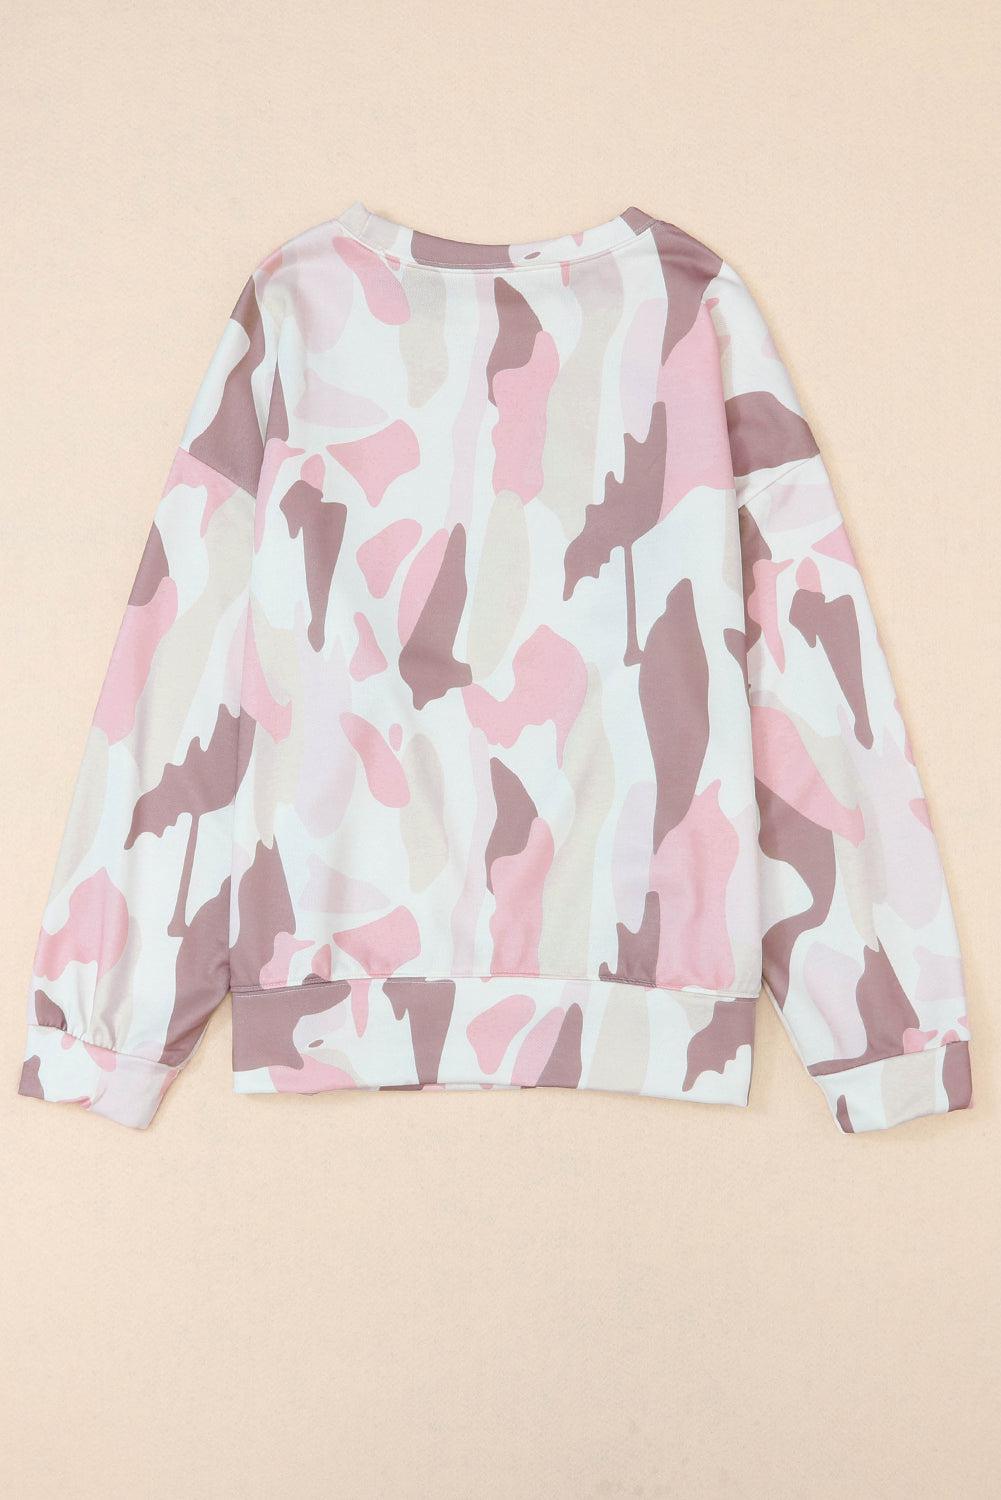 a pink and white camo sweatshirt on a beige background